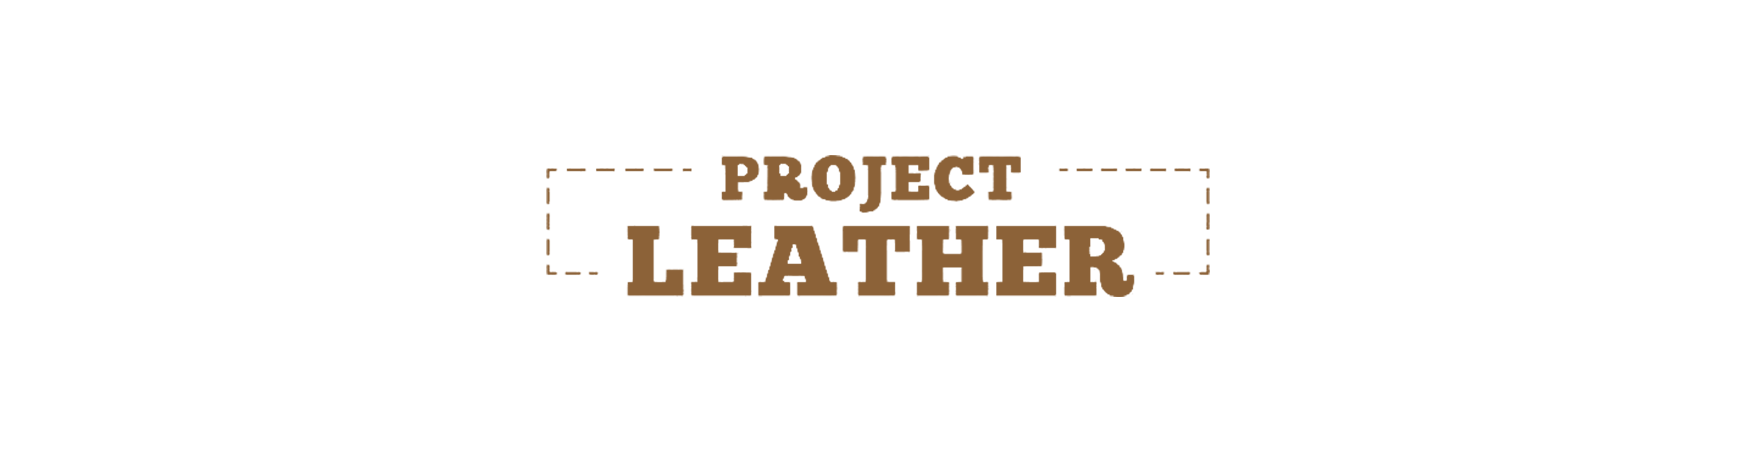 Project Leather